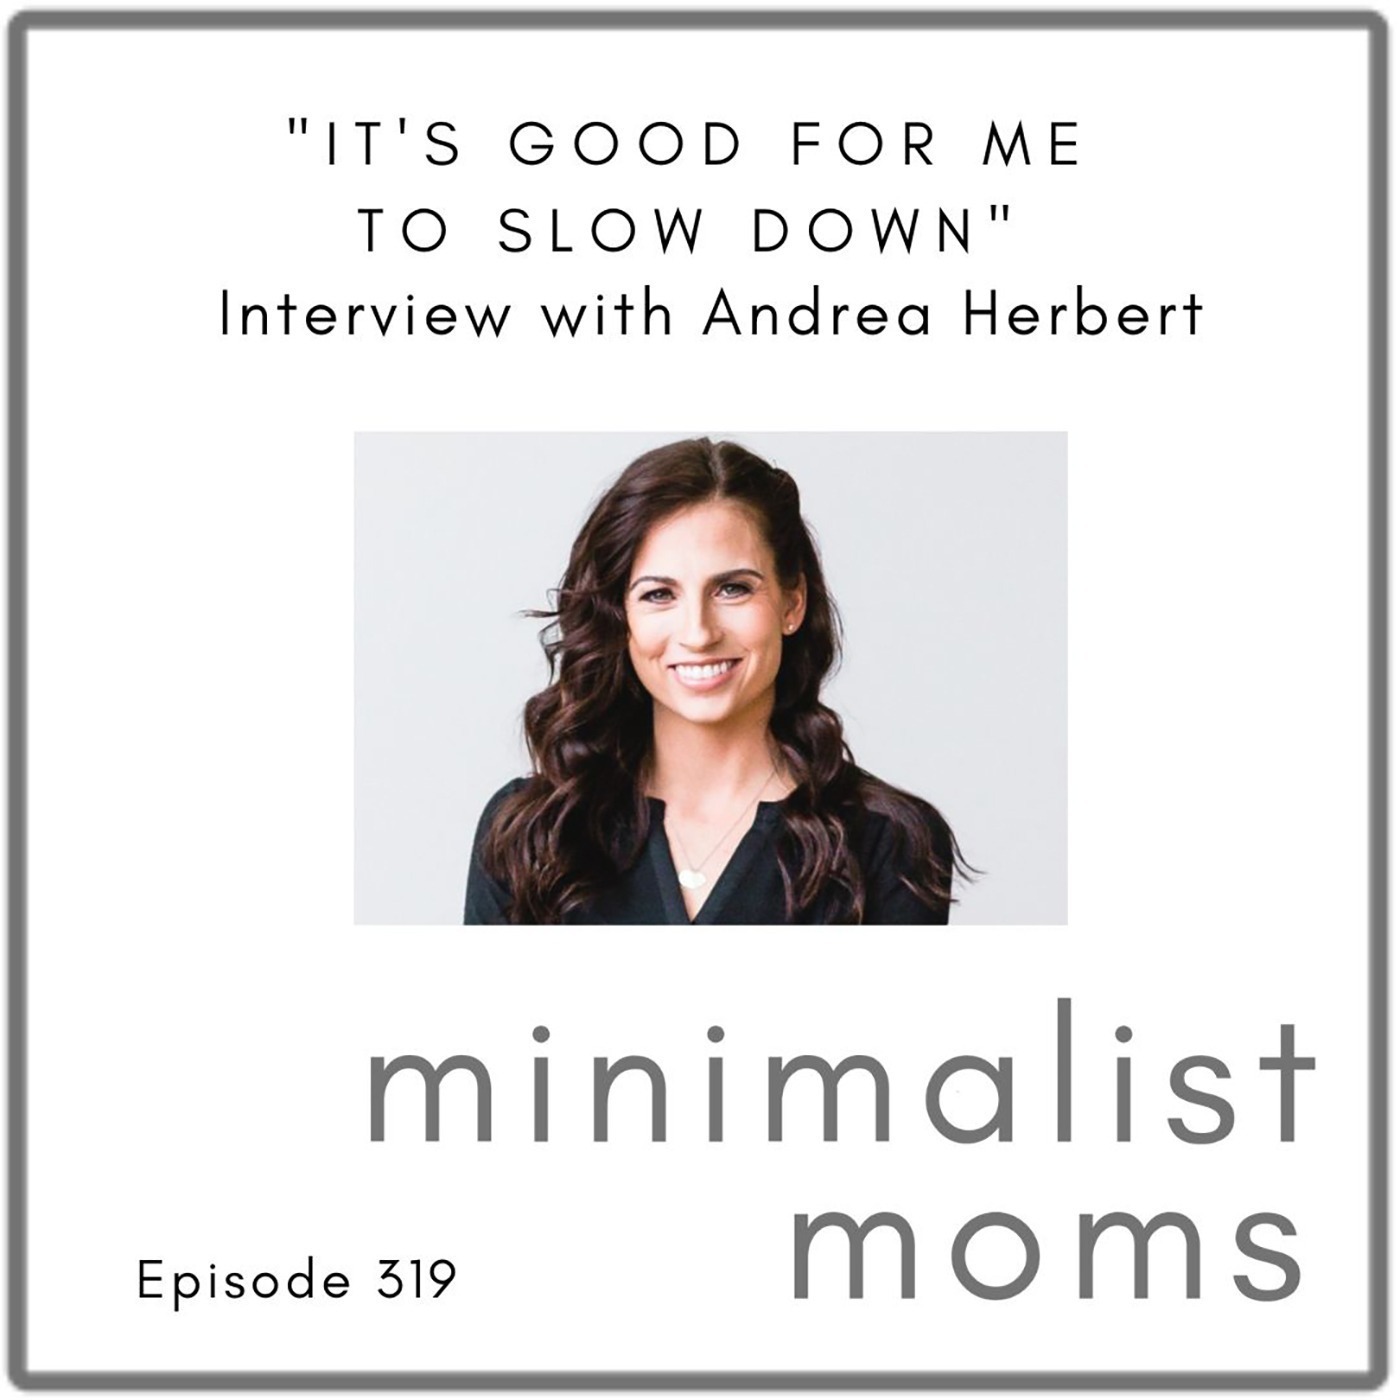 "It's Good for Me to Slow Down" with Andrea Herbert (EP319)